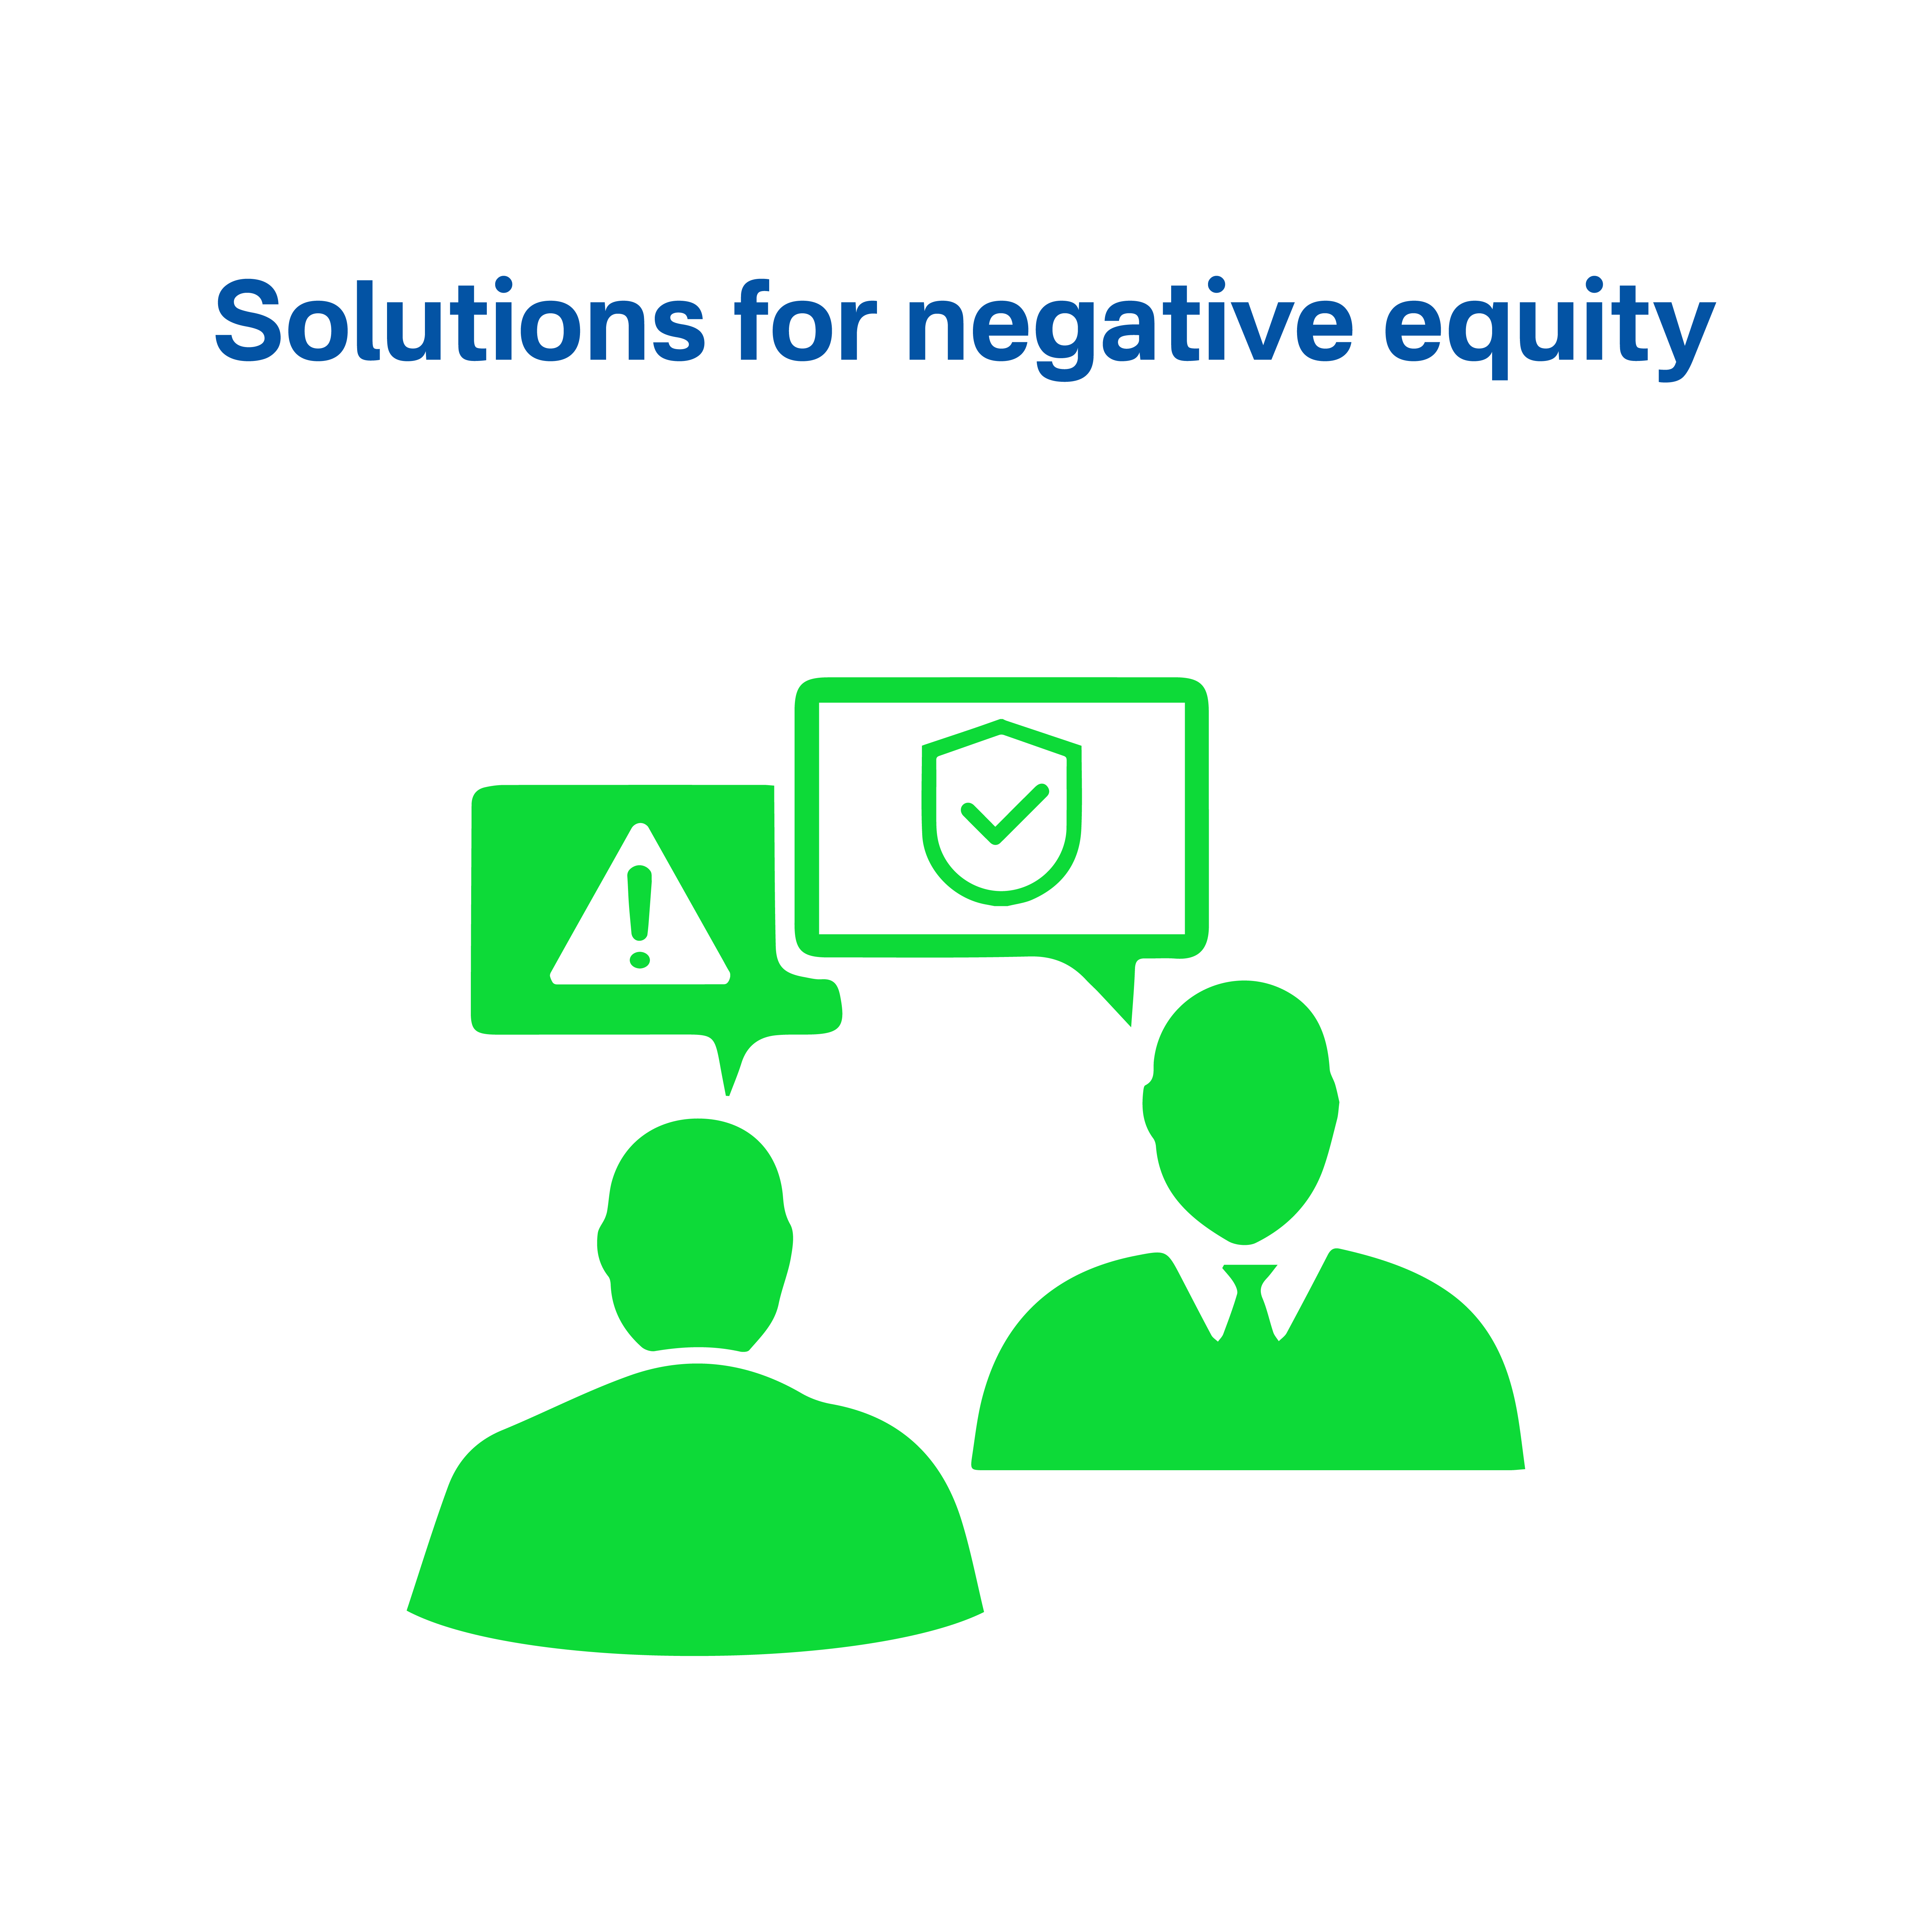 Solutions for negative equity